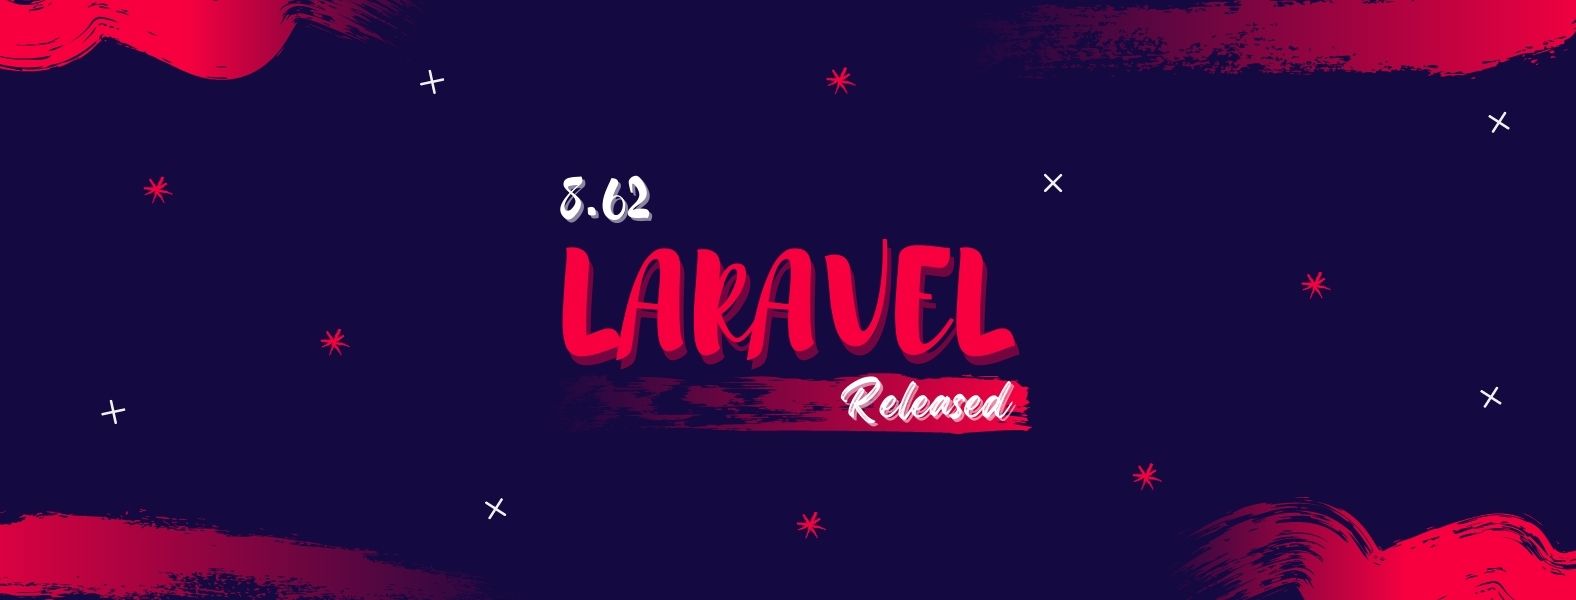 Laravel 8.62 Released - Analysis of Features And Updates